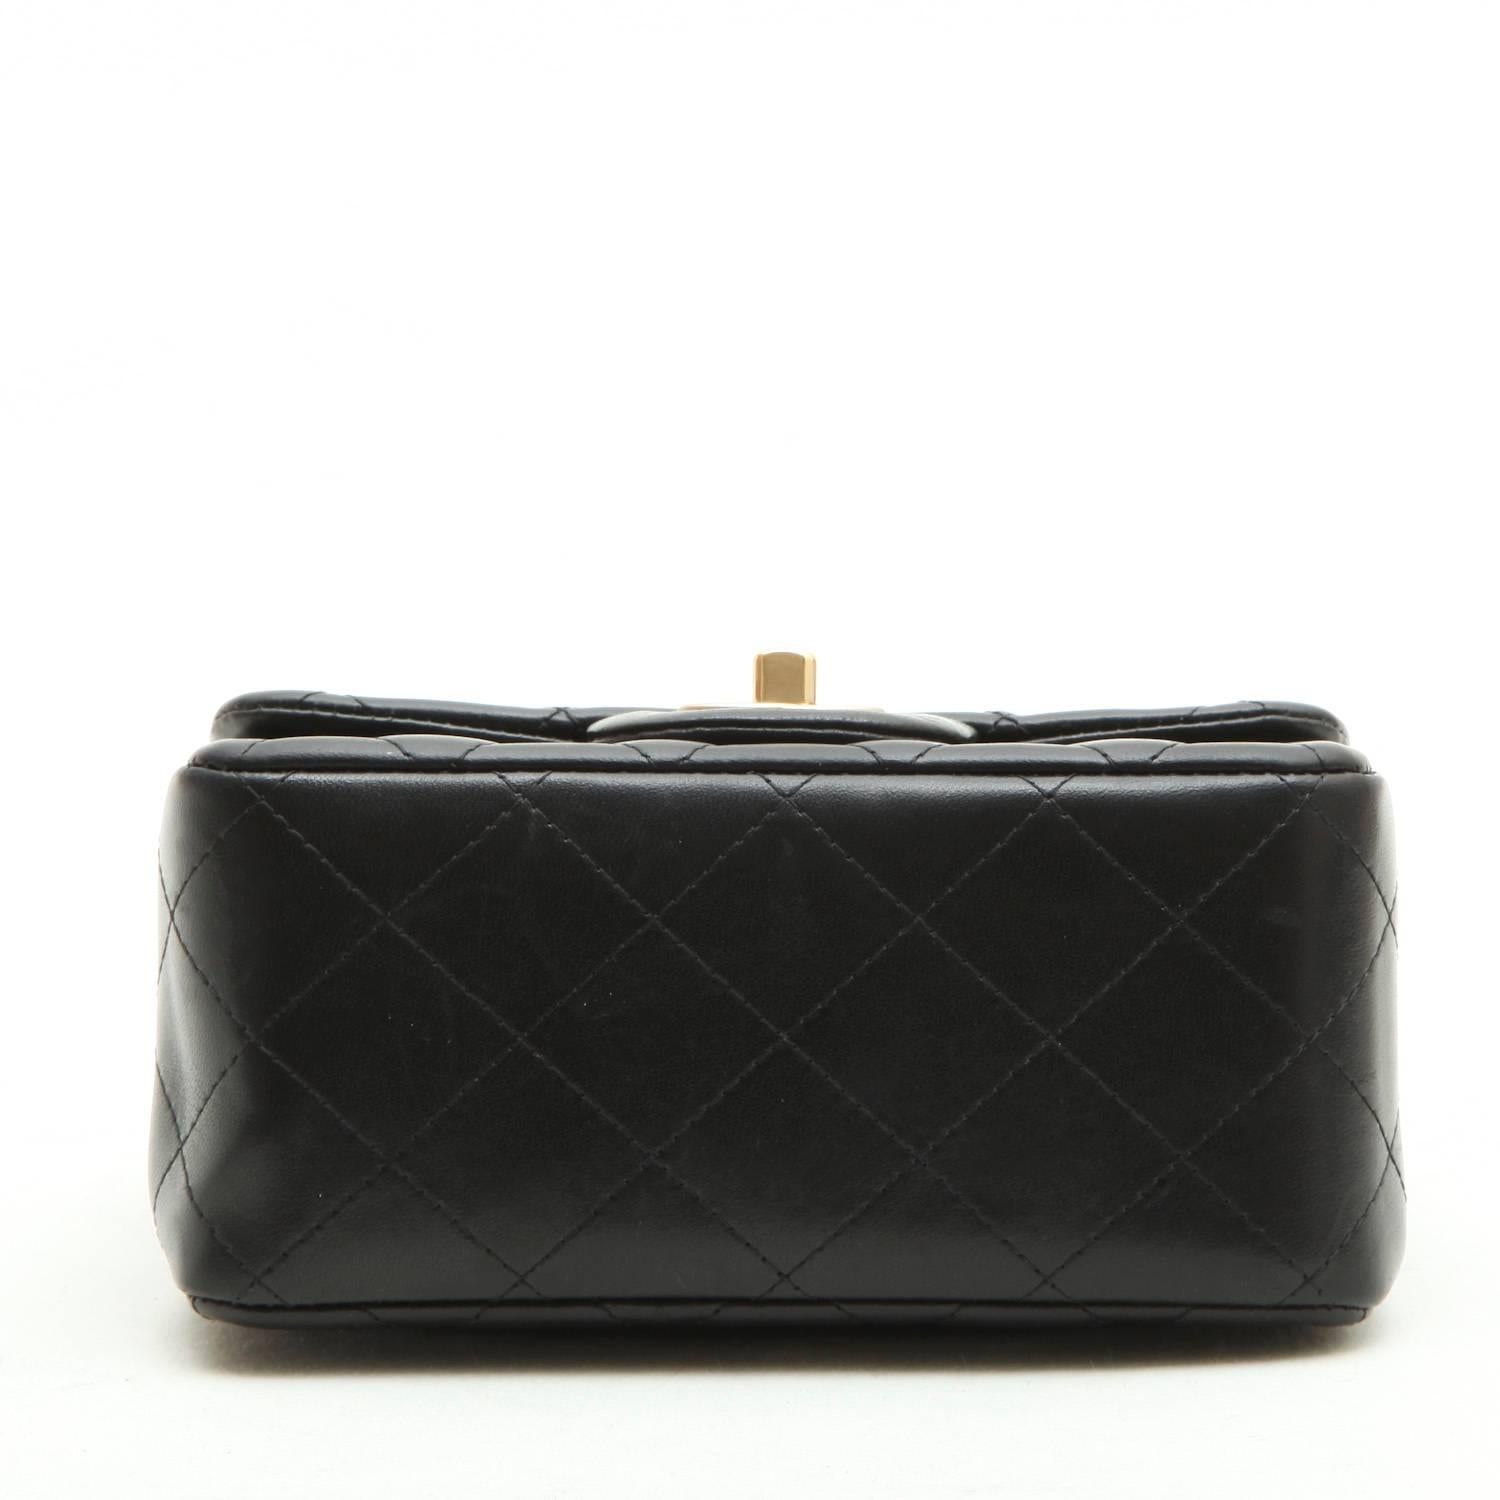 Mini CHANEL Bag in Black Quilted lambskin Leather 2